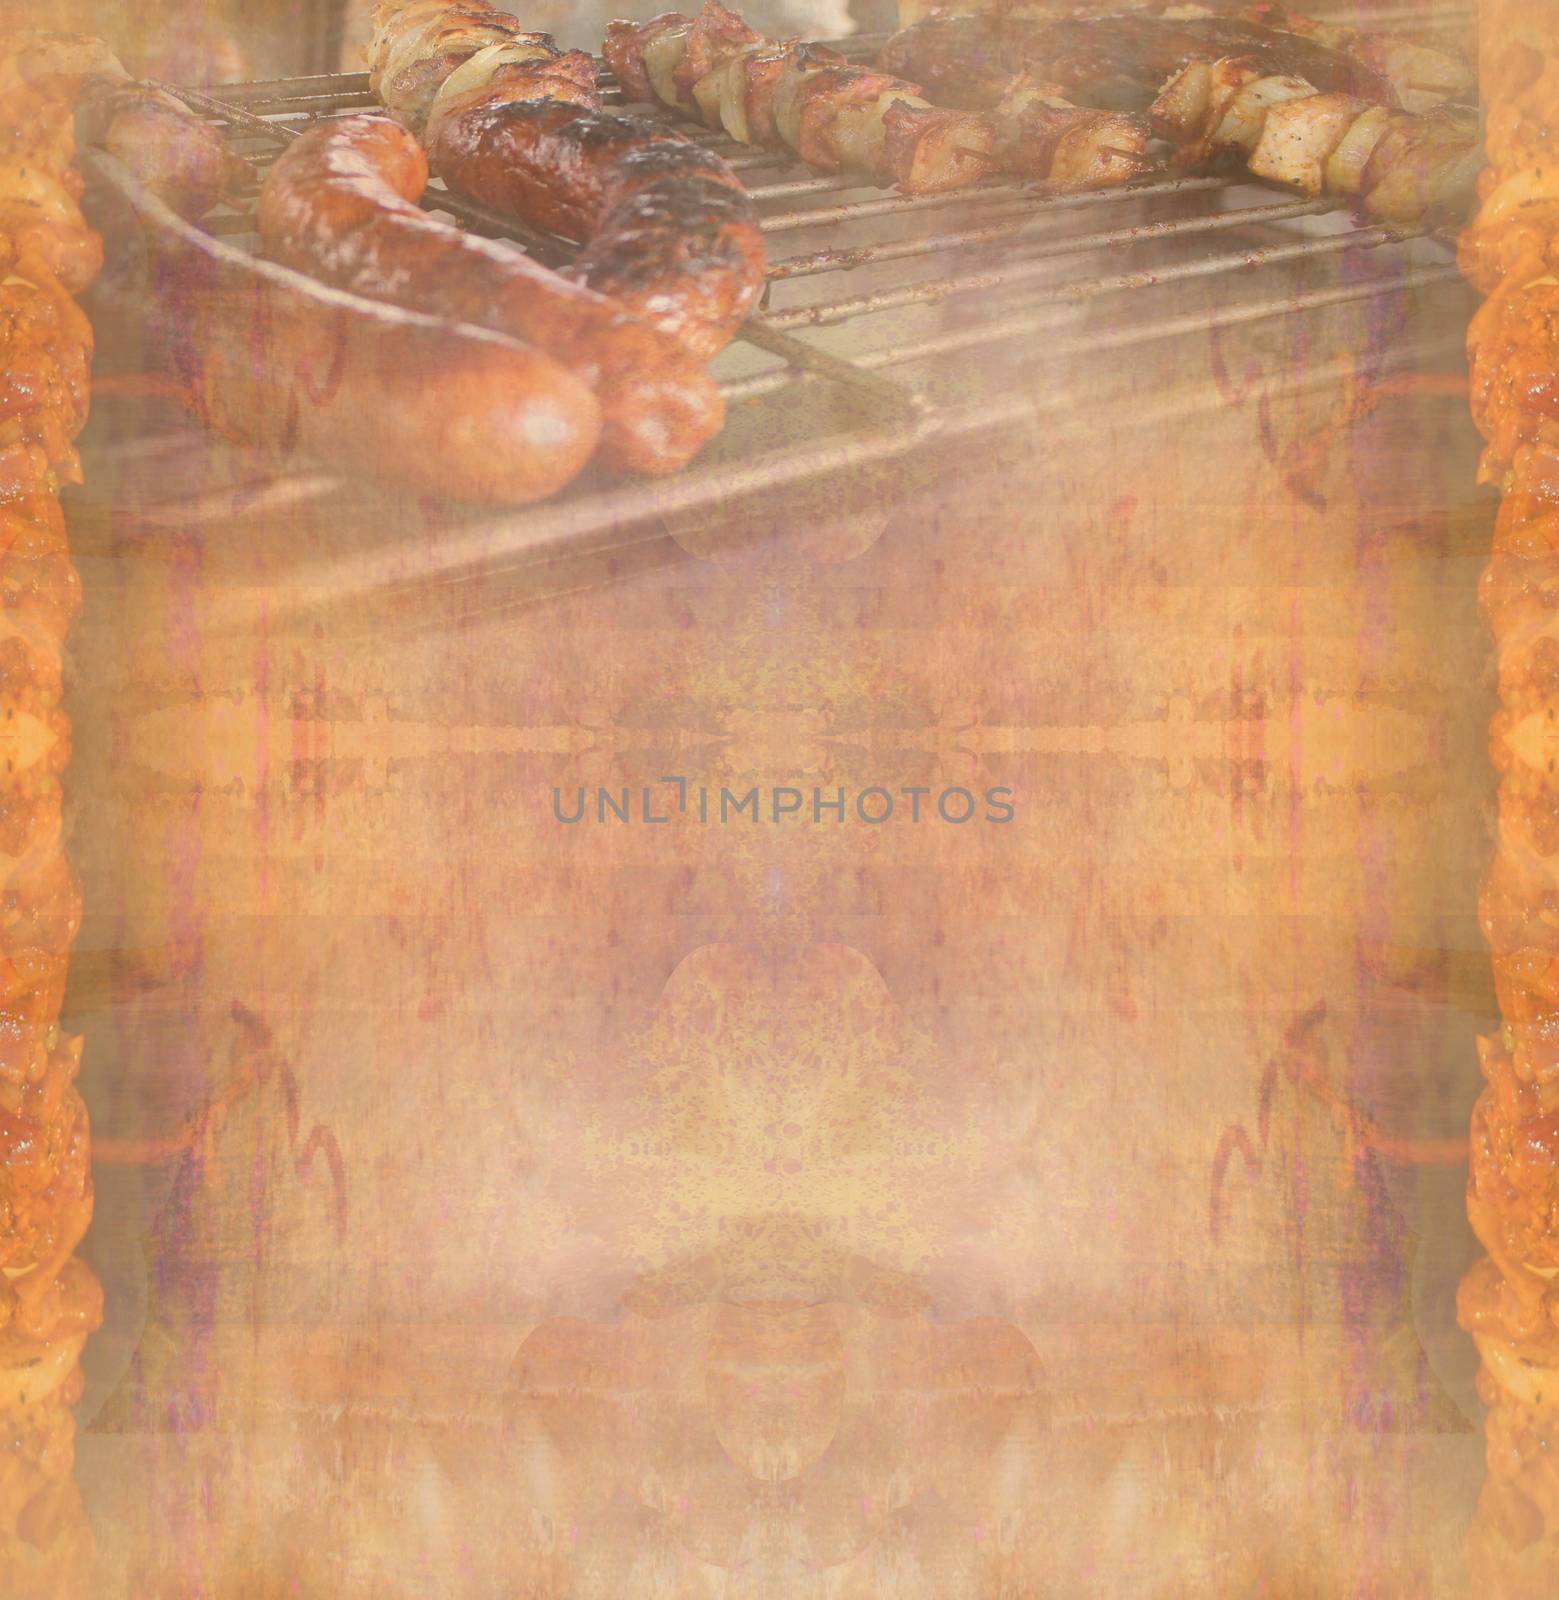 barbecue with delicious grilled meat ,Abstract vintage frame